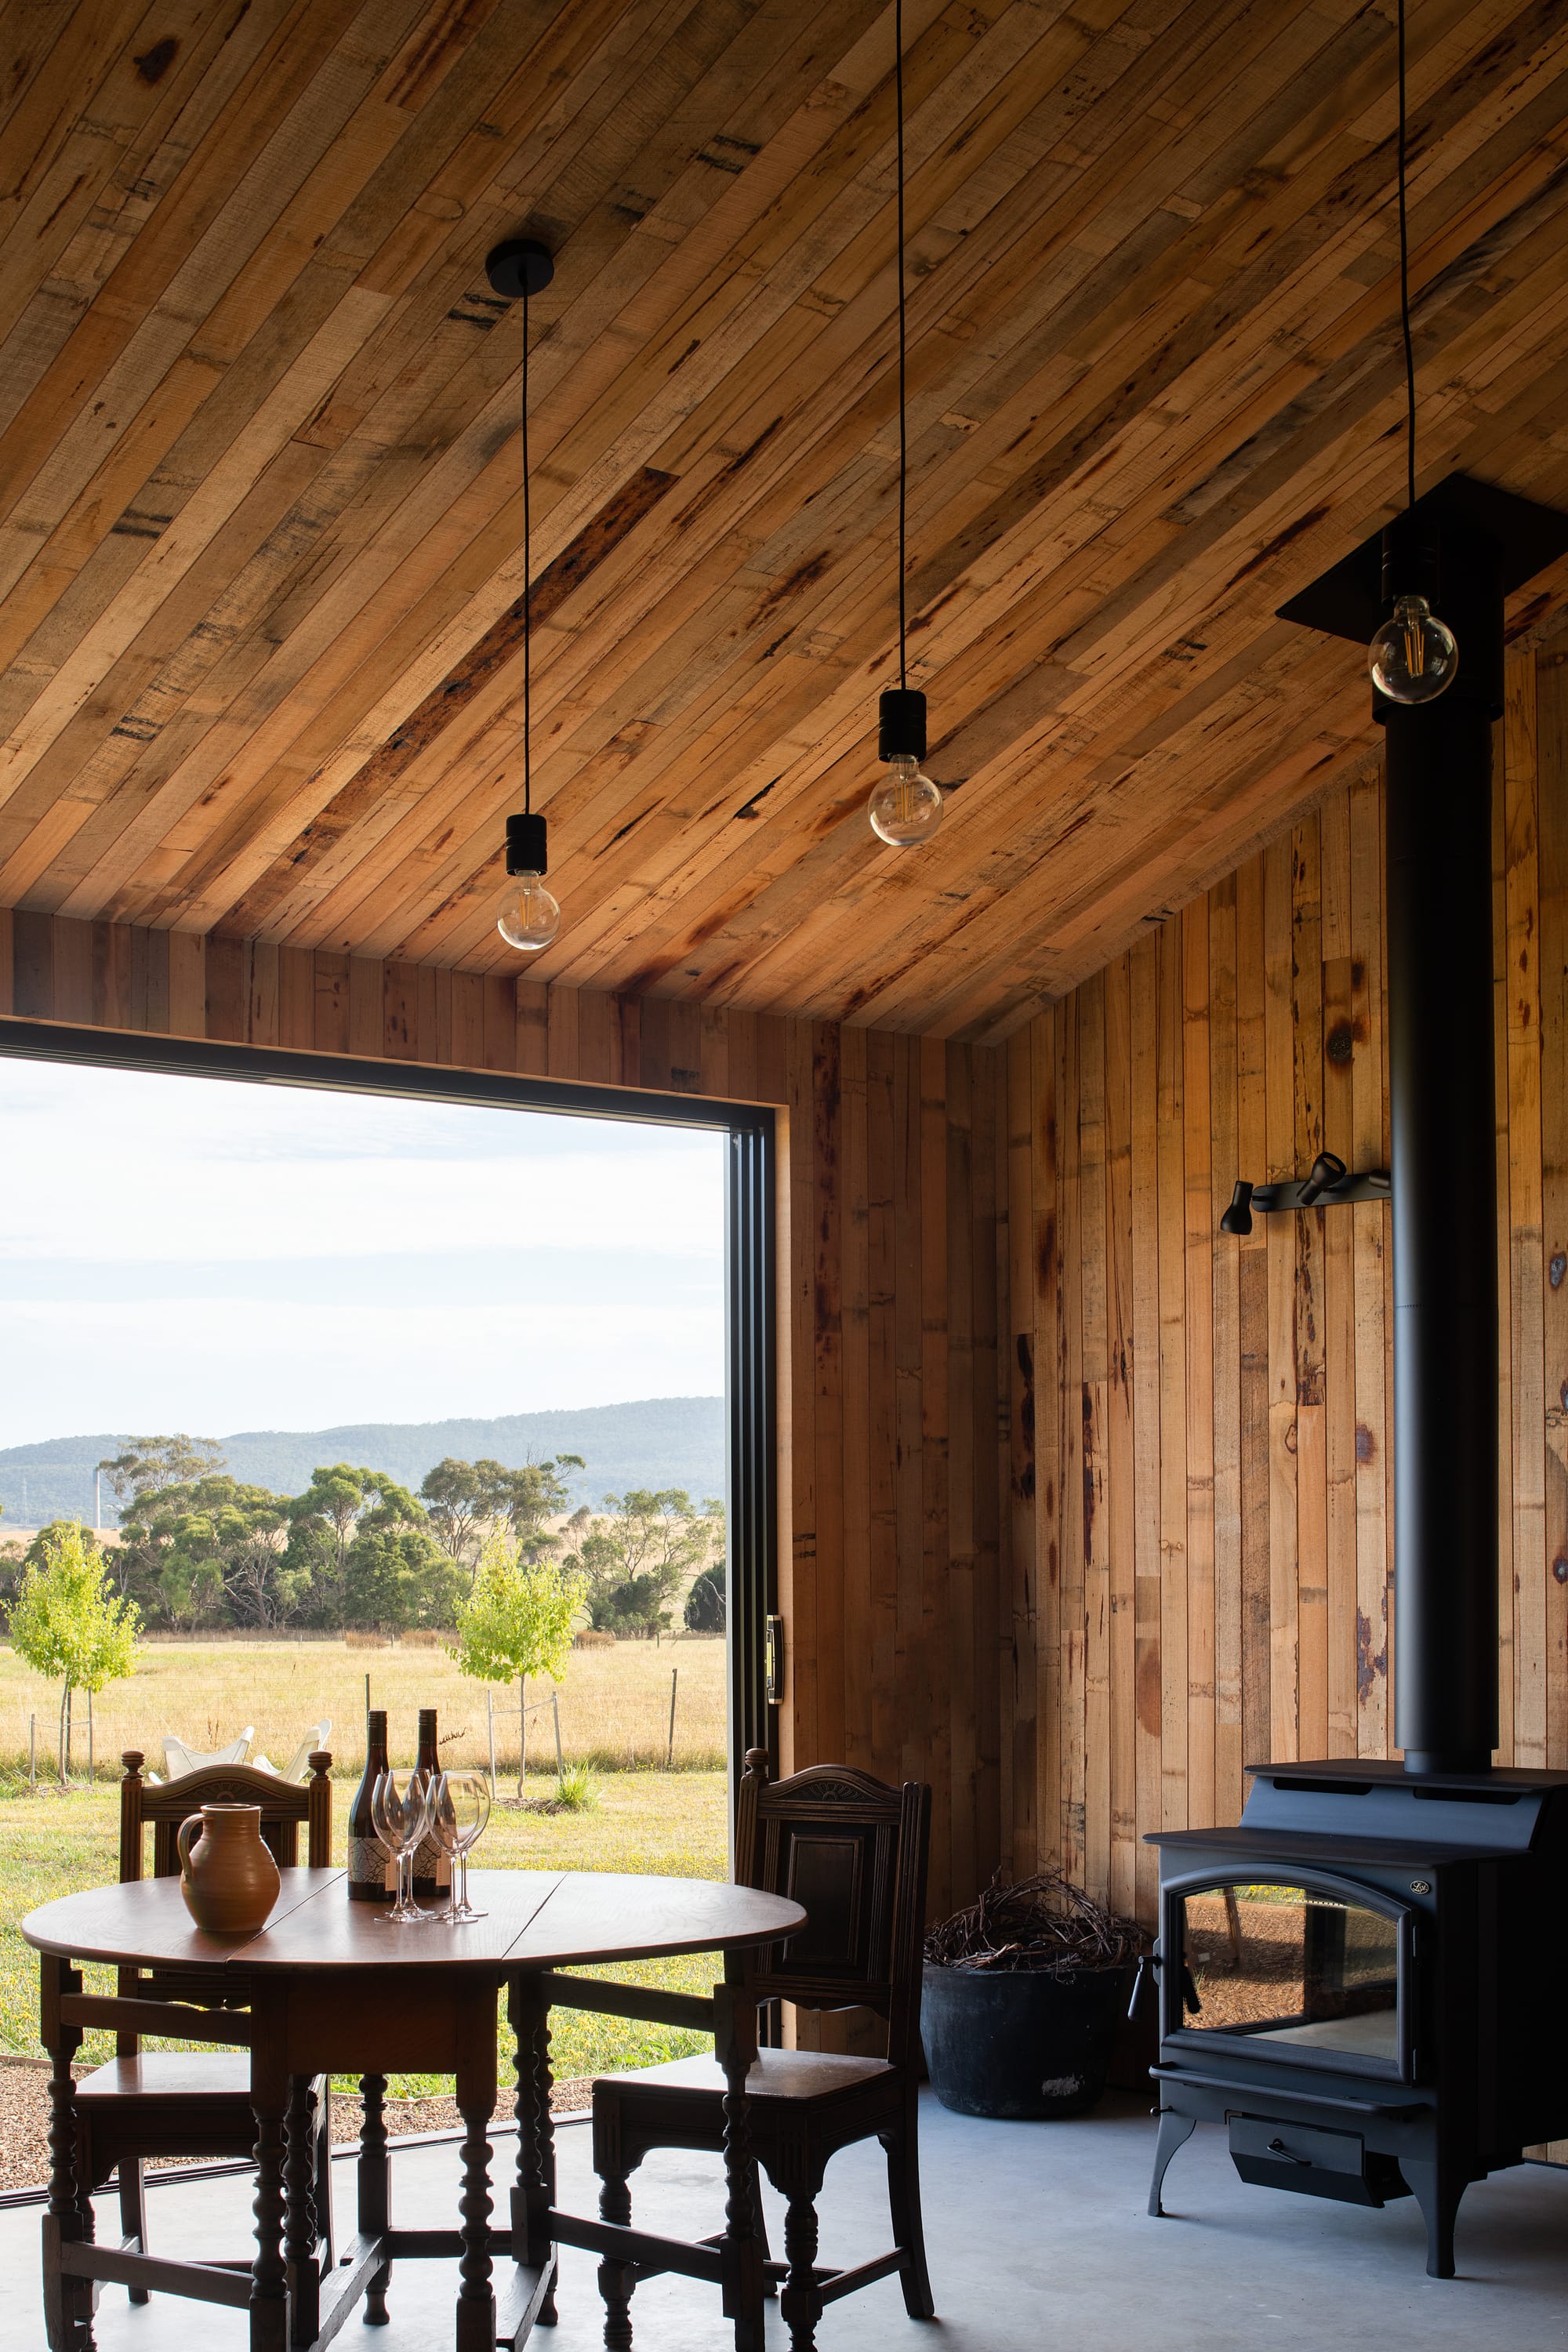 Tasmanian Timber Series: Westella Vineyard. View from cellar looking out onto property. 